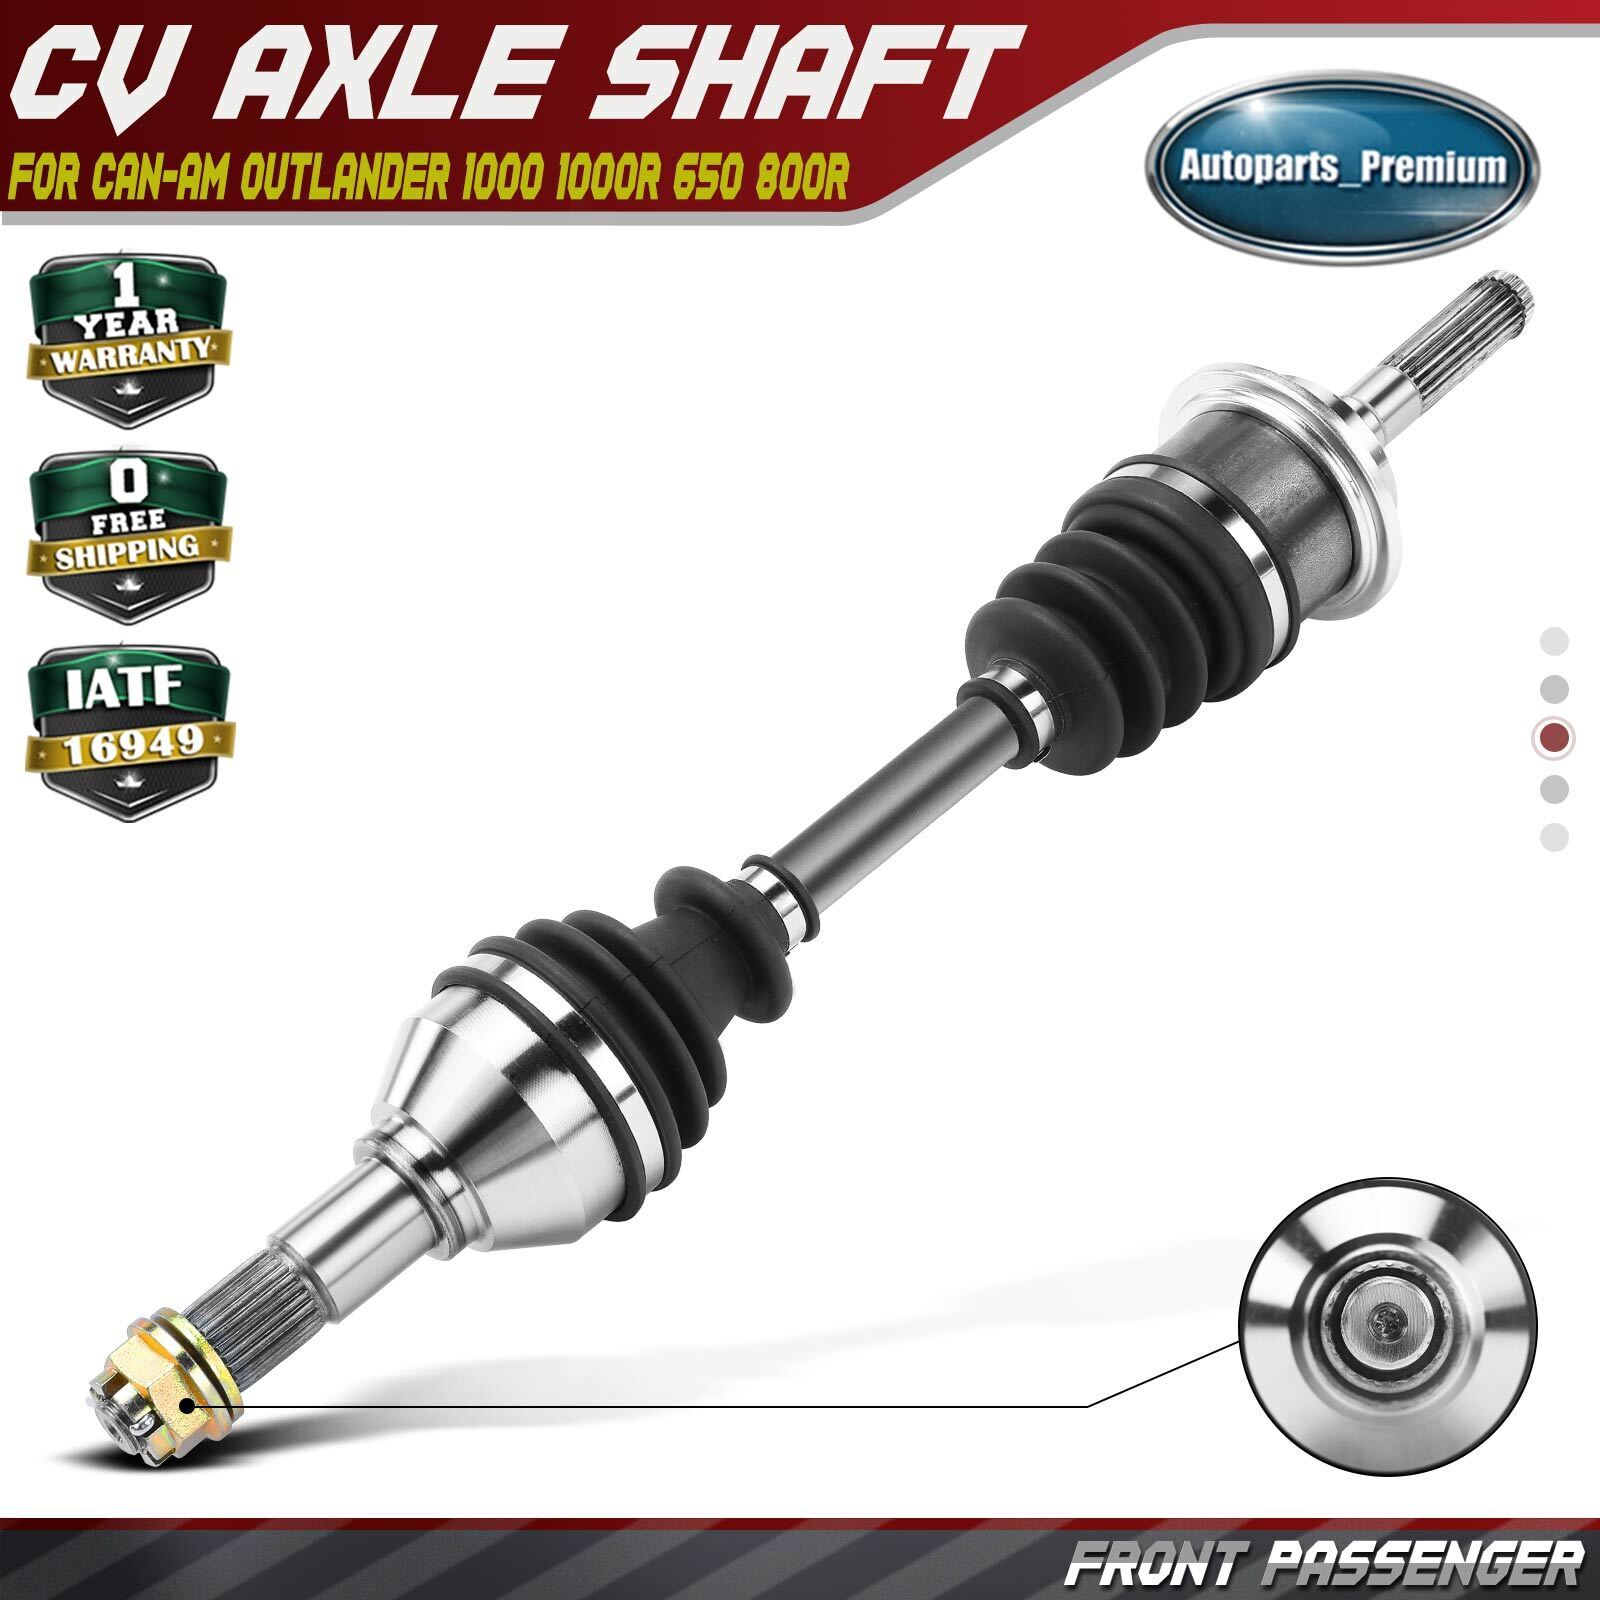 New Front Right CV Axle Assembly for Can-Am Outlander 1000 1000R 650 800R 850